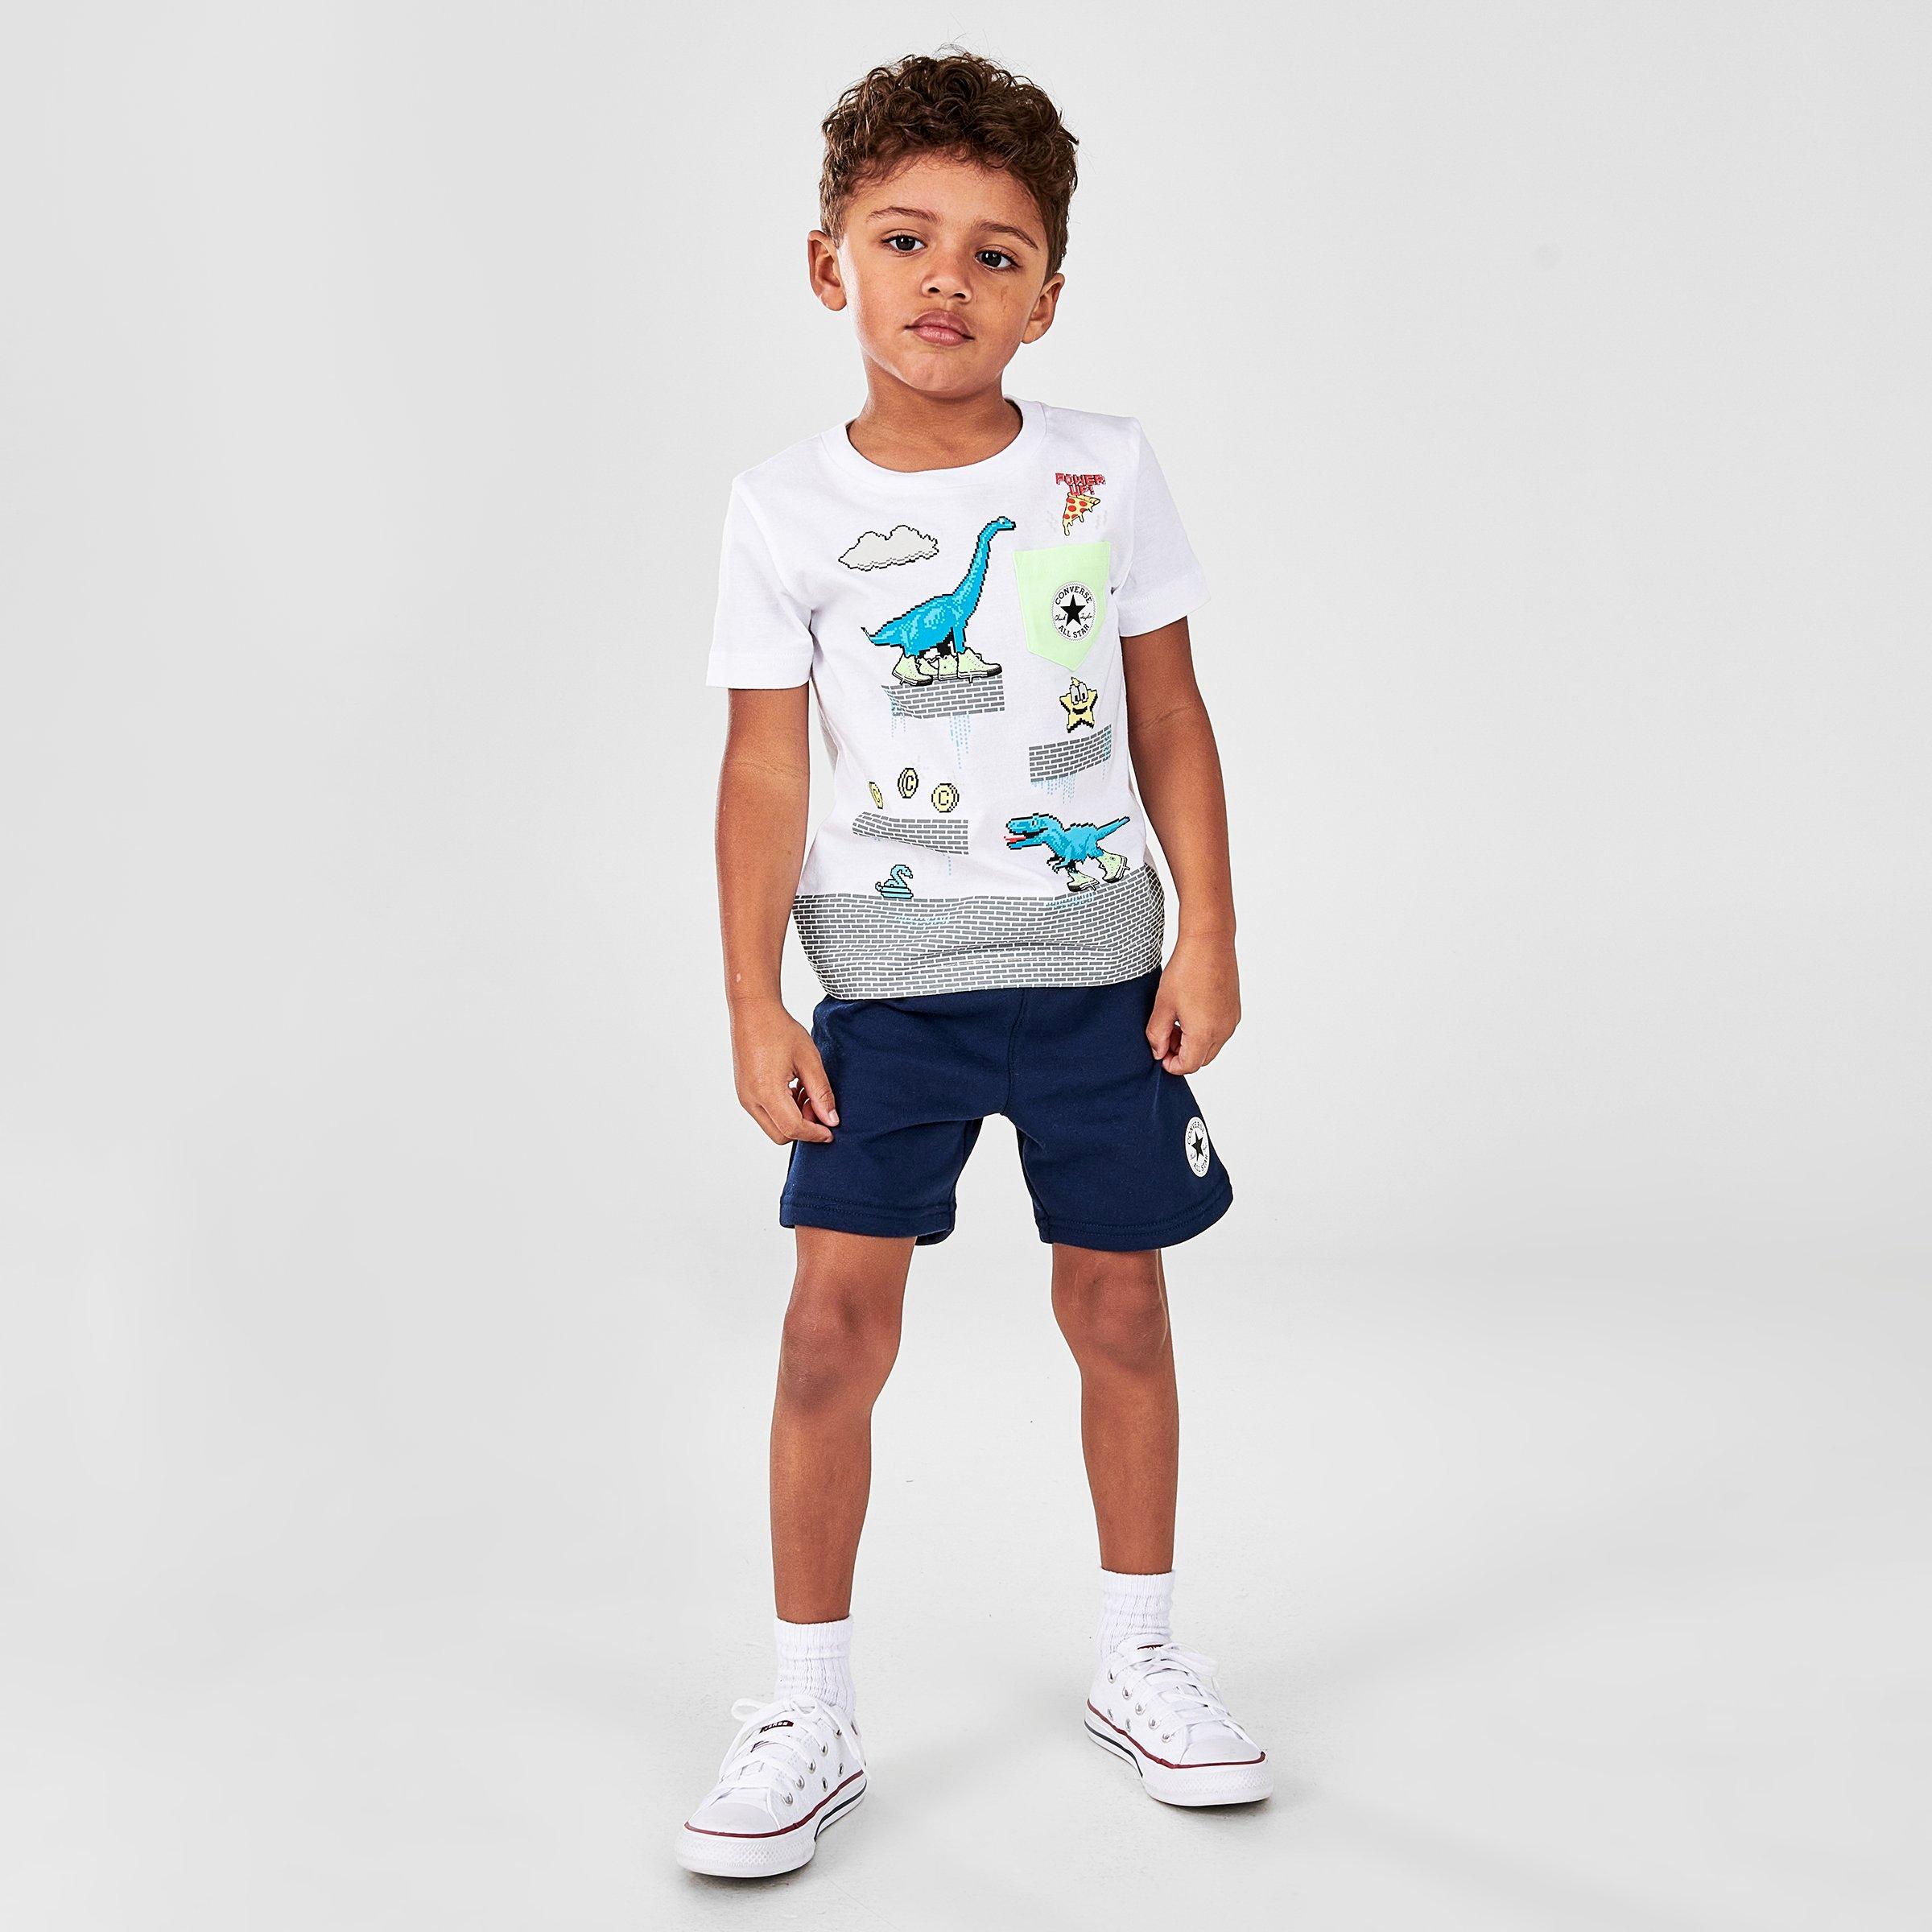 Converse Babies' Boys' Dinosaur T-shirt And Shorts In White/navy |